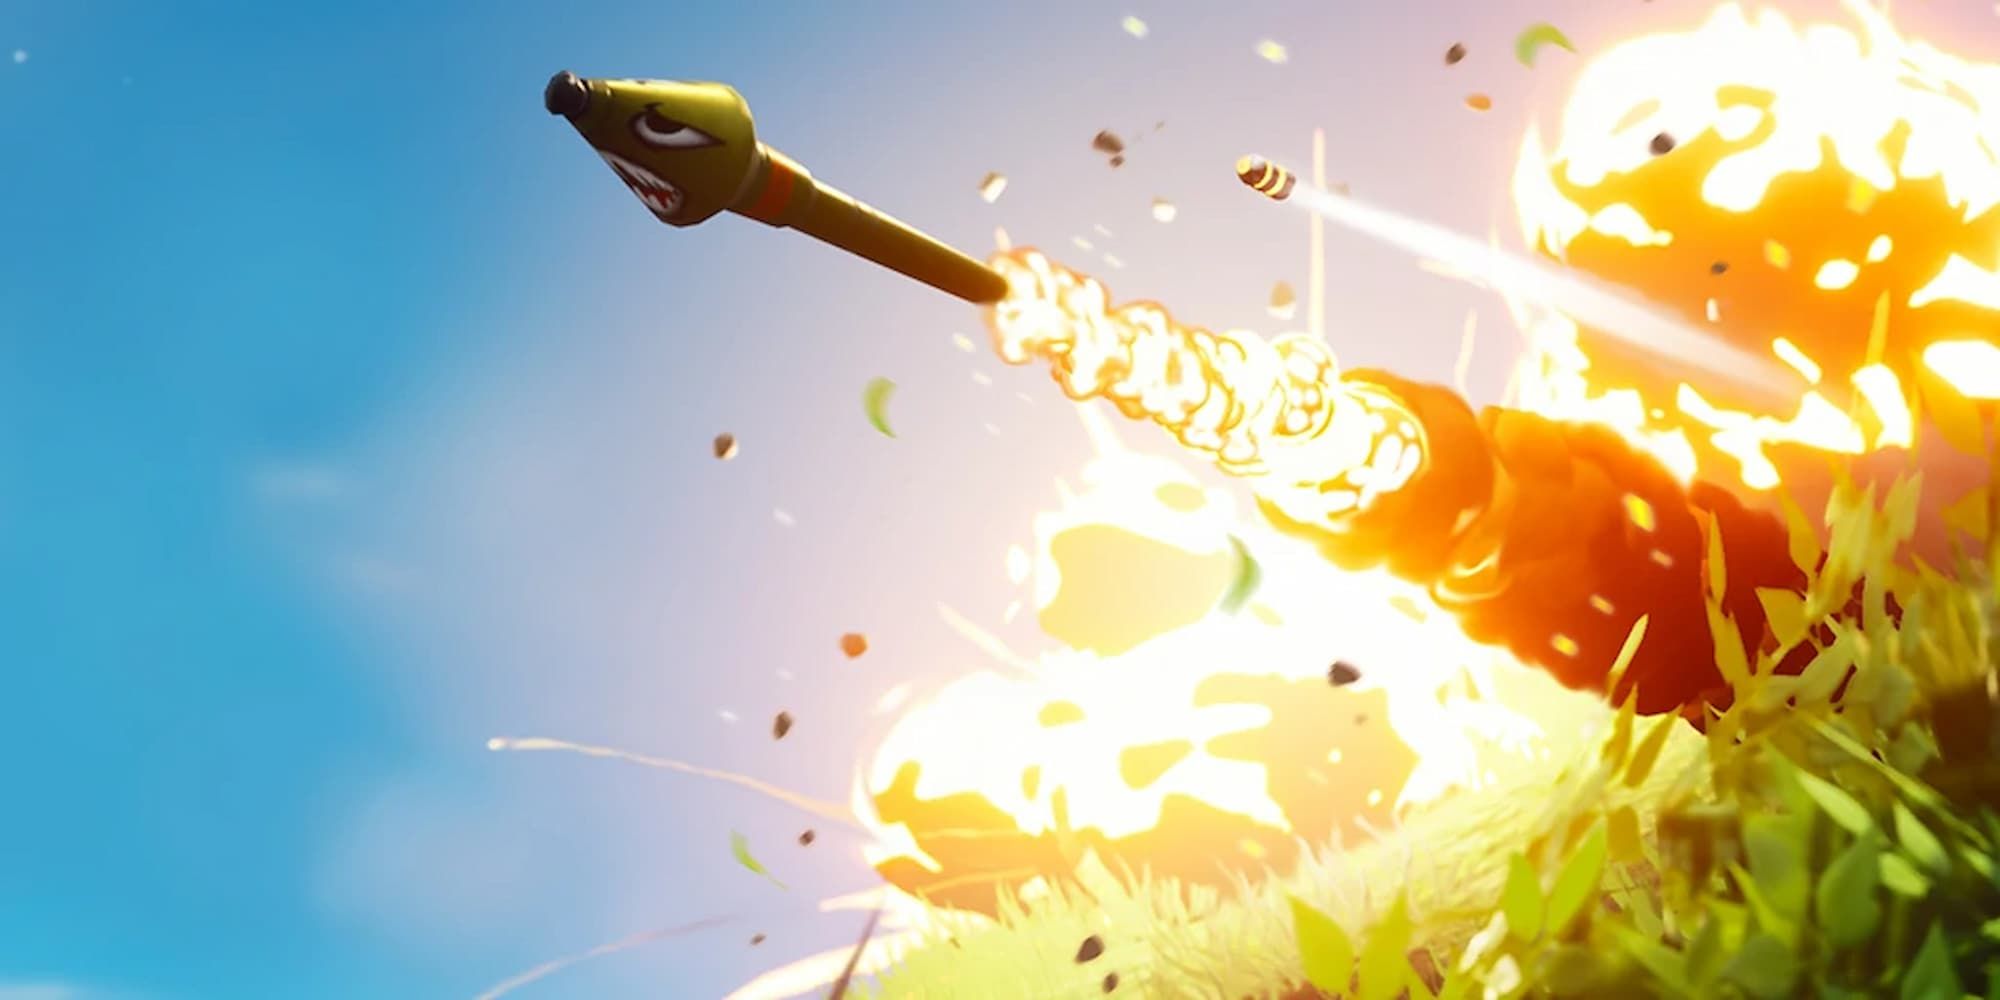 A rocket from Fortnite blasts forward as part of the High Explosives LTM.